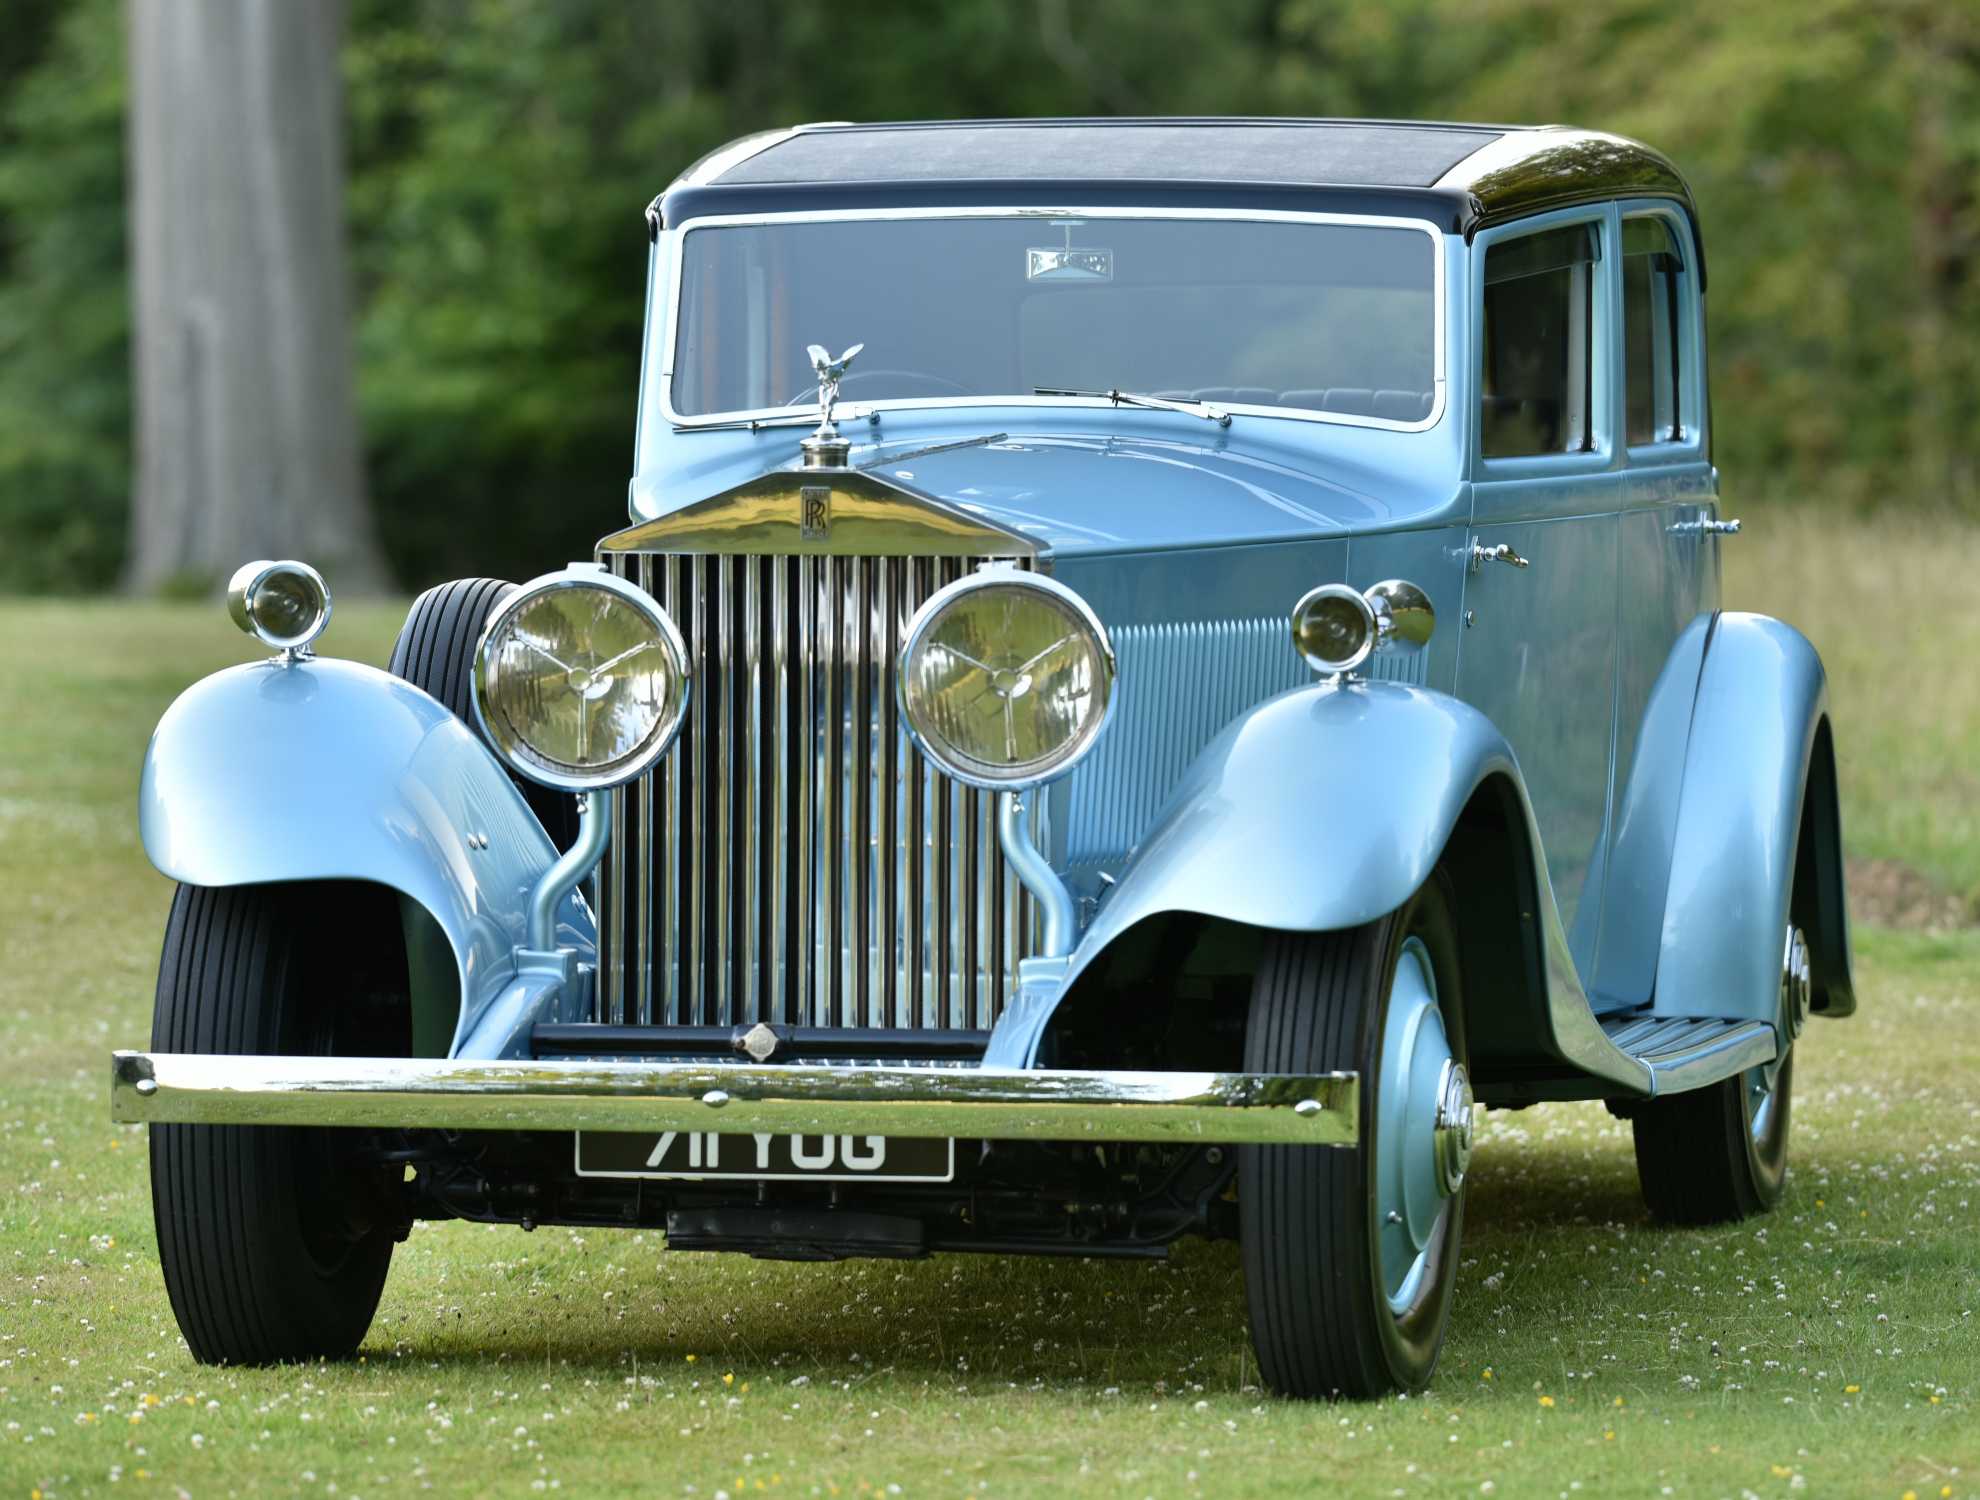 ROLLS-ROYCE ANNOUNCES ‘THE GREAT EIGHT PHANTOMS’ – A ROLLS-ROYCE EXHIBITION WILL BE AT BONHAMS